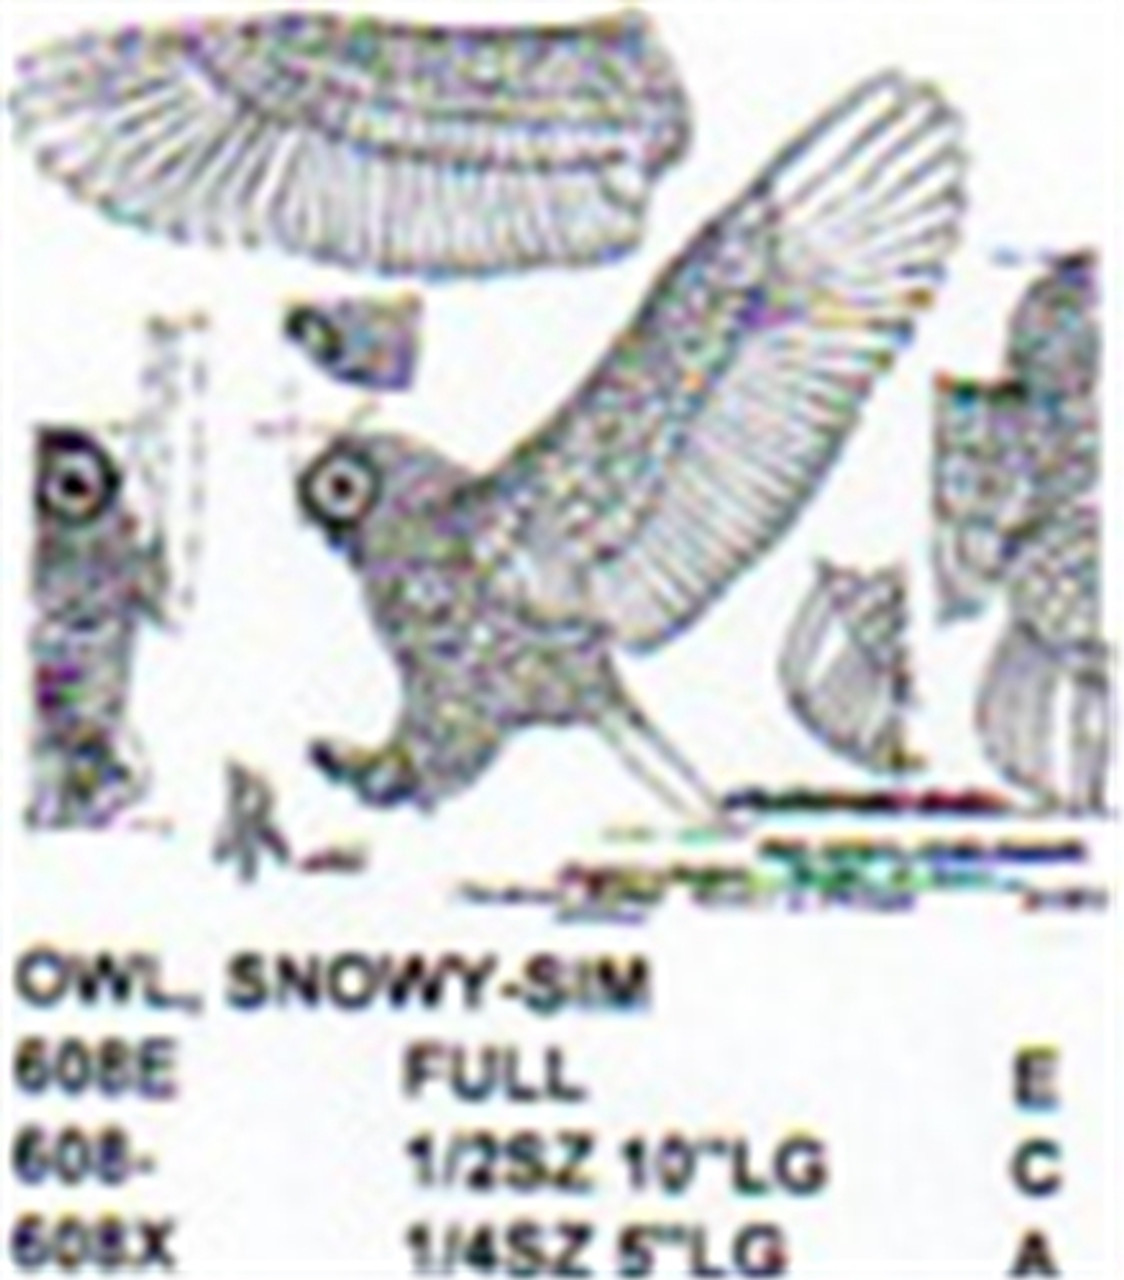 Snowy Owl Flying/Landing Carving Pattern showing the Owl landing with wings spread.